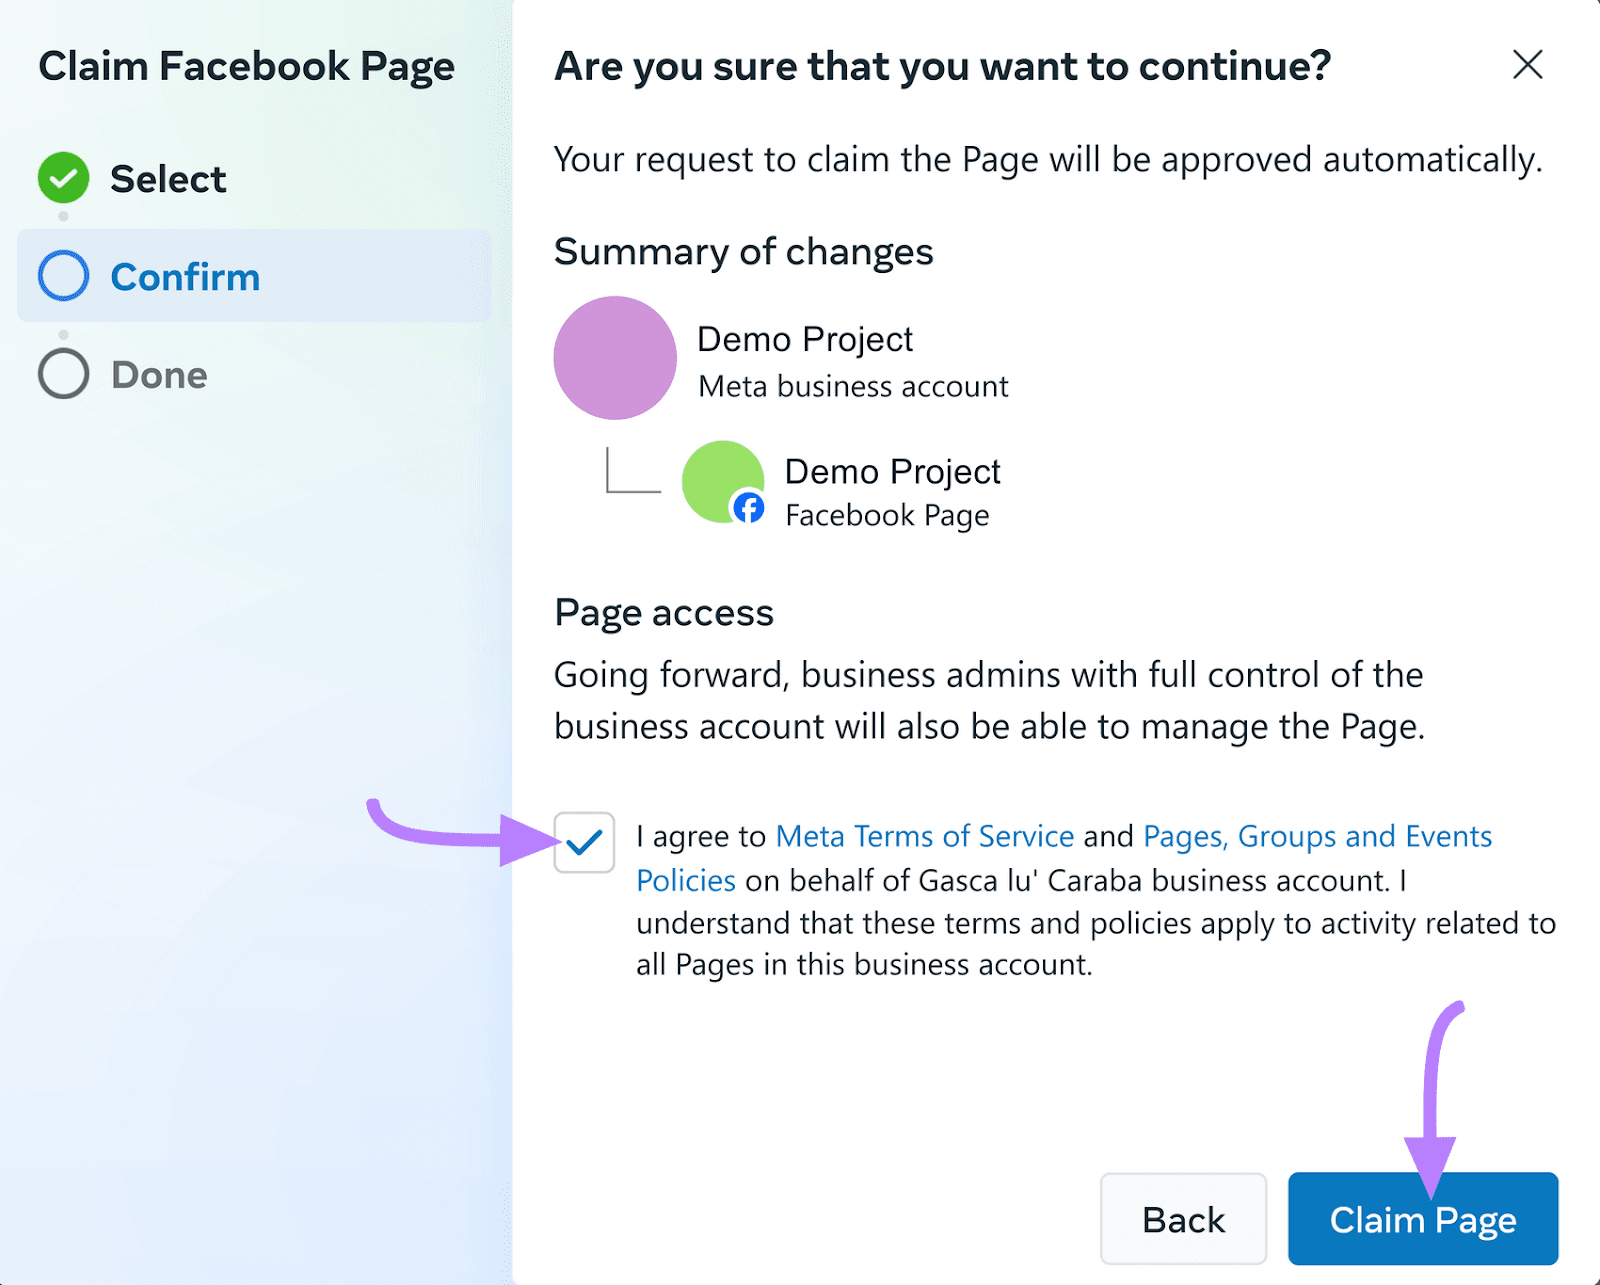 Terms and conditions box checked and "Claim Page" button highlighted